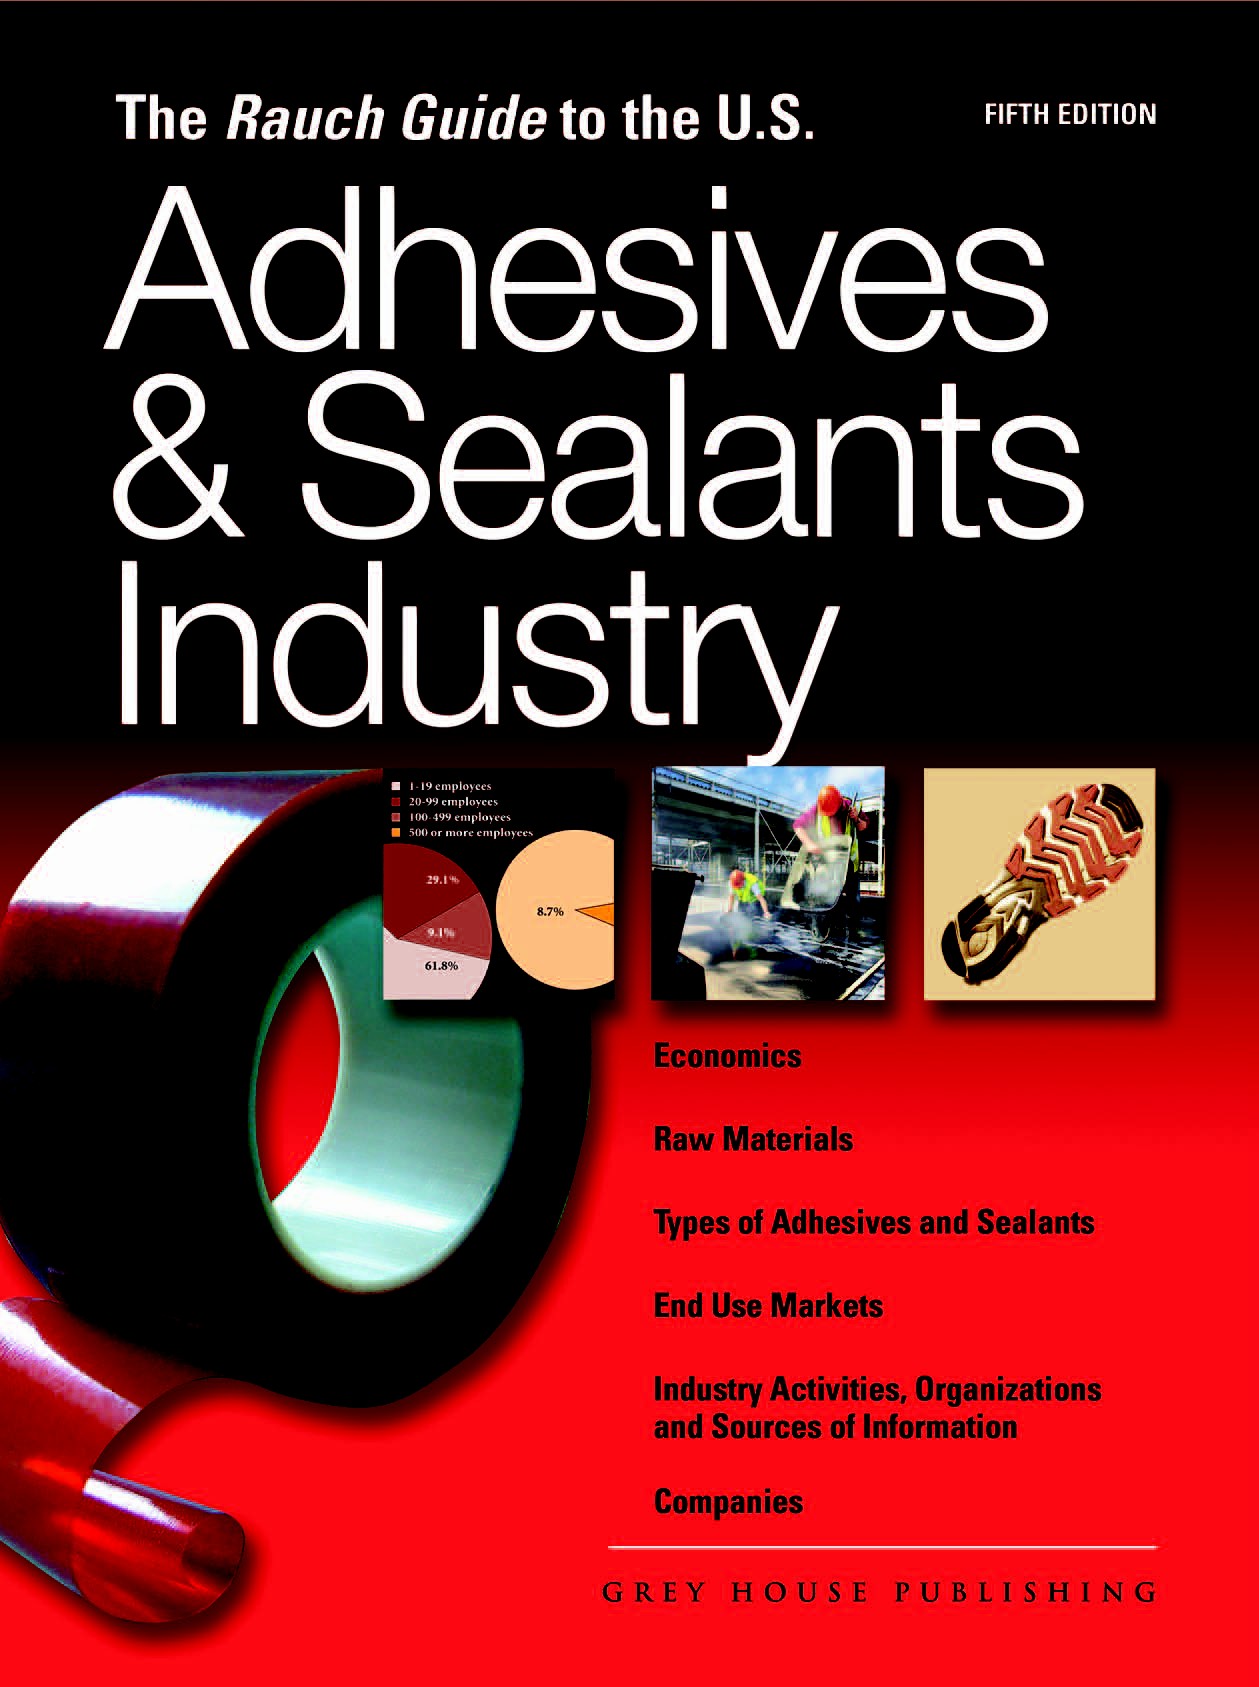 Rauch Guide to the US Adhesives & Sealants Industry